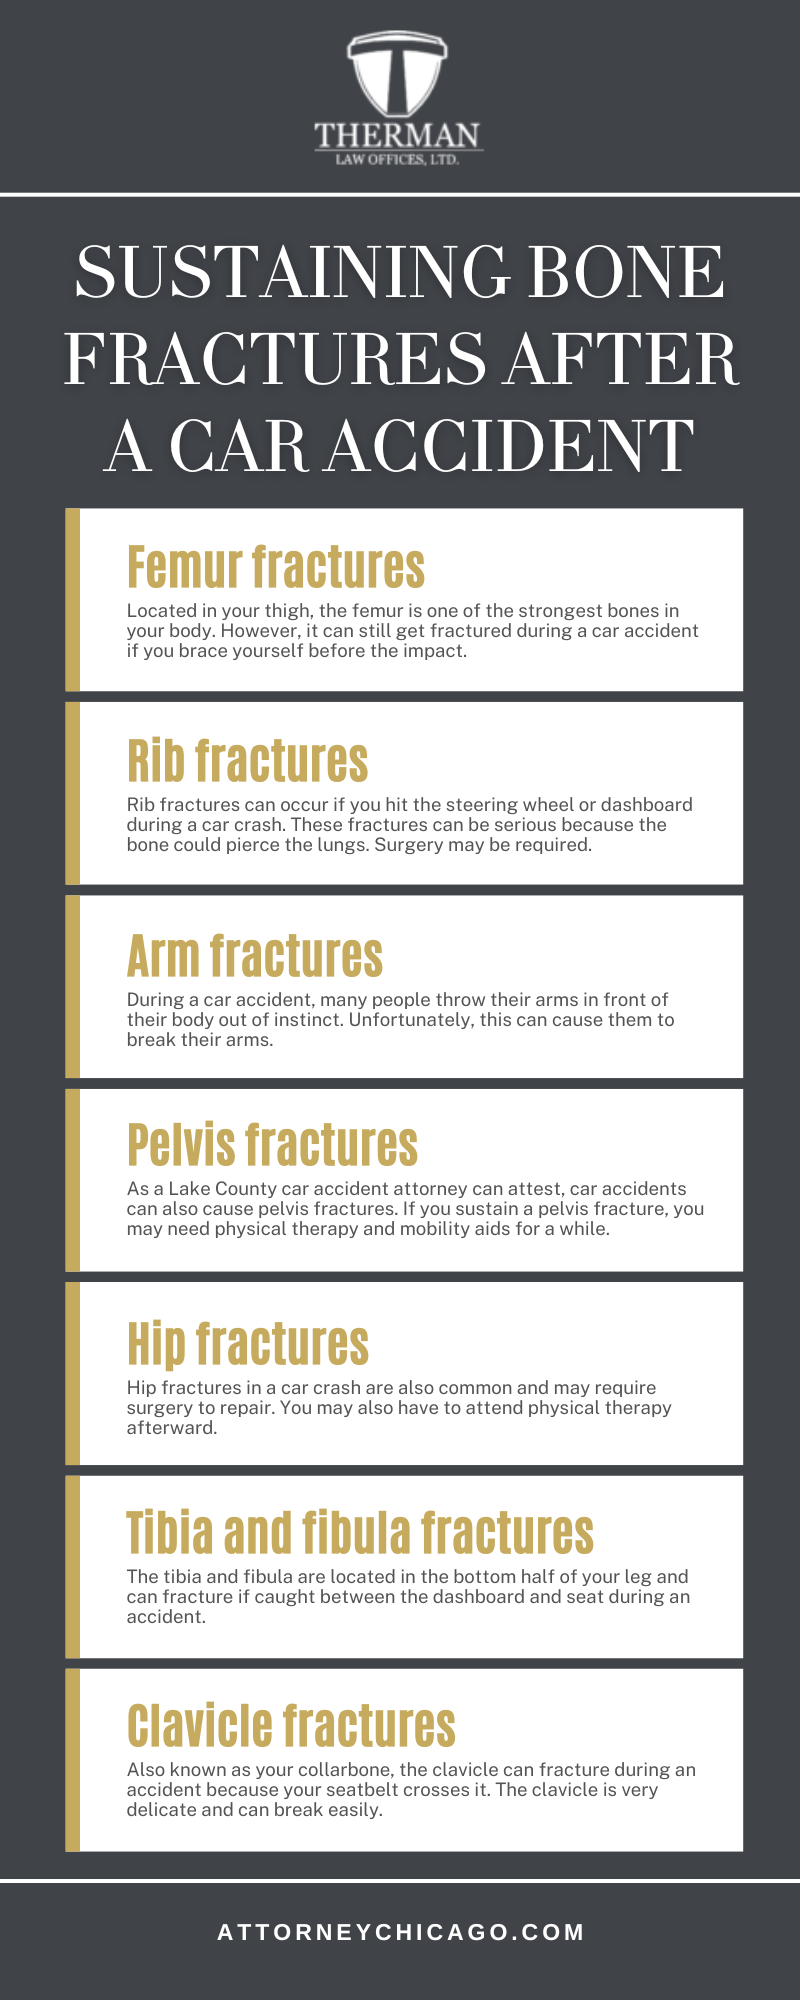 Sustaining Bone Fractures After A Car Accident Infographic